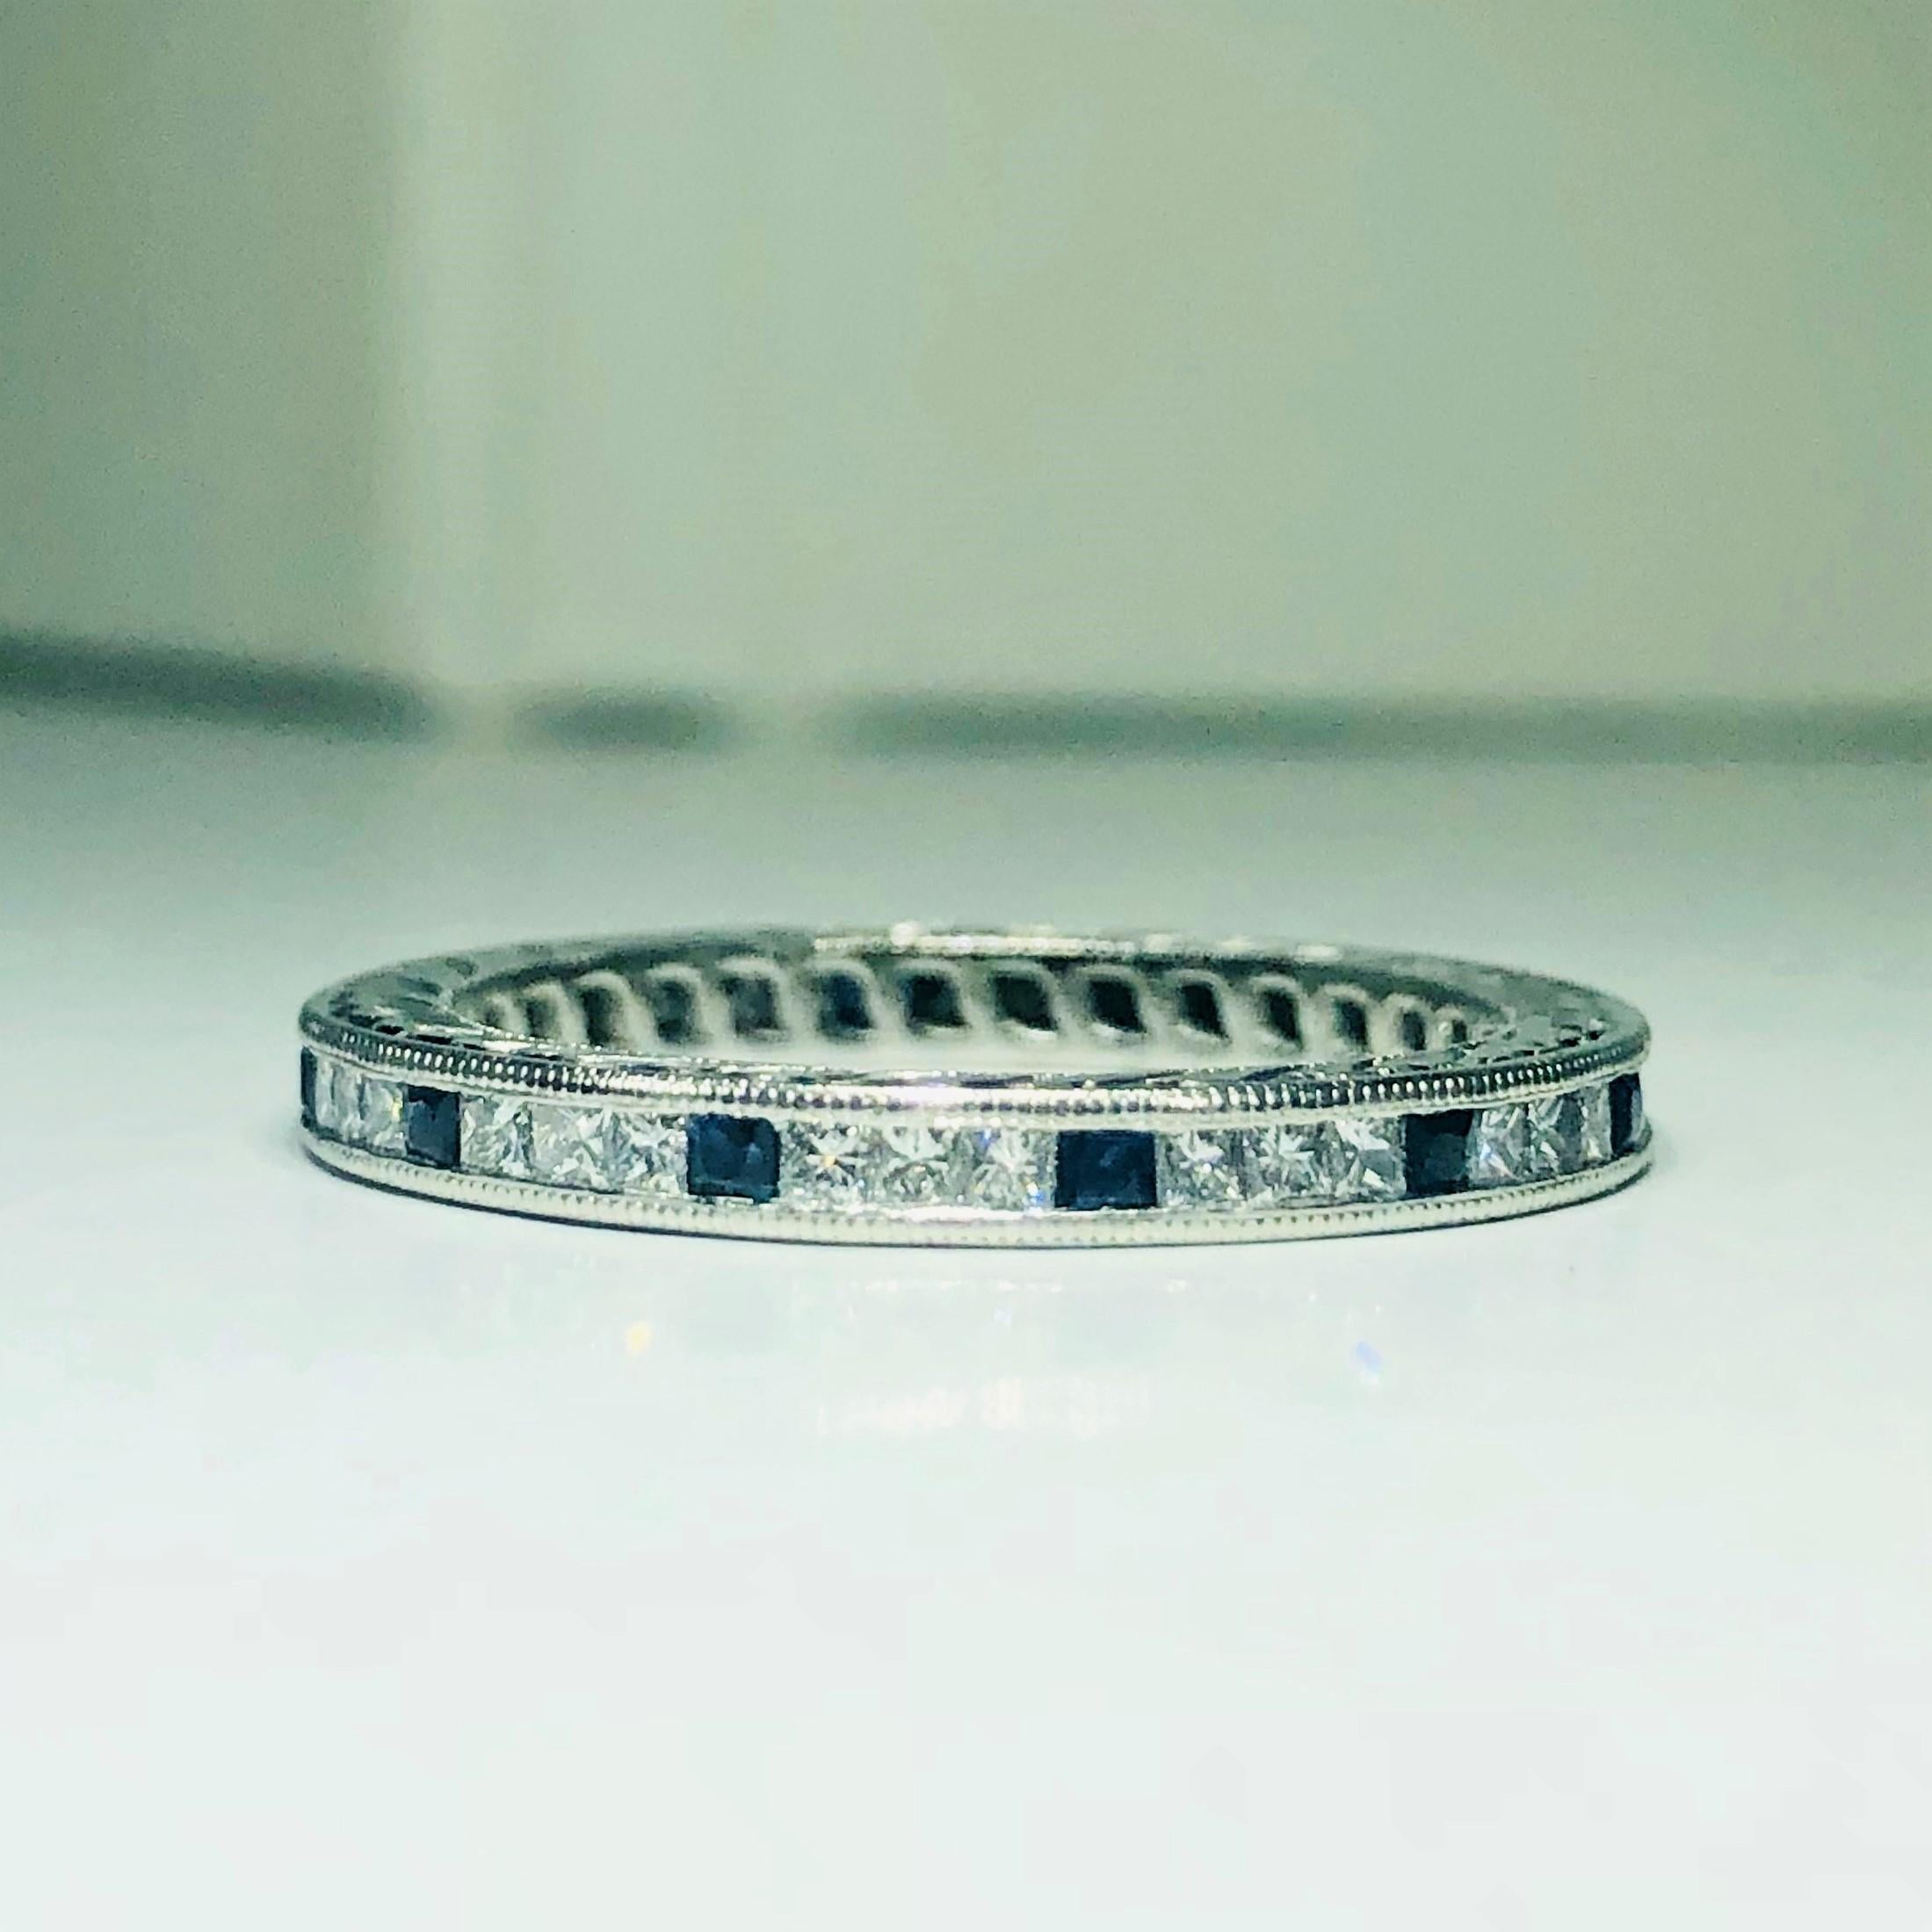 Tacori platinum princess cut diamond and sapphire eternity band. This designer Tacori creation is a unique and exquisite piece, embodies the Tacori reputation. This is a platinum eternity band, weight 3.9 grams. The ring is adorned with 12 princess